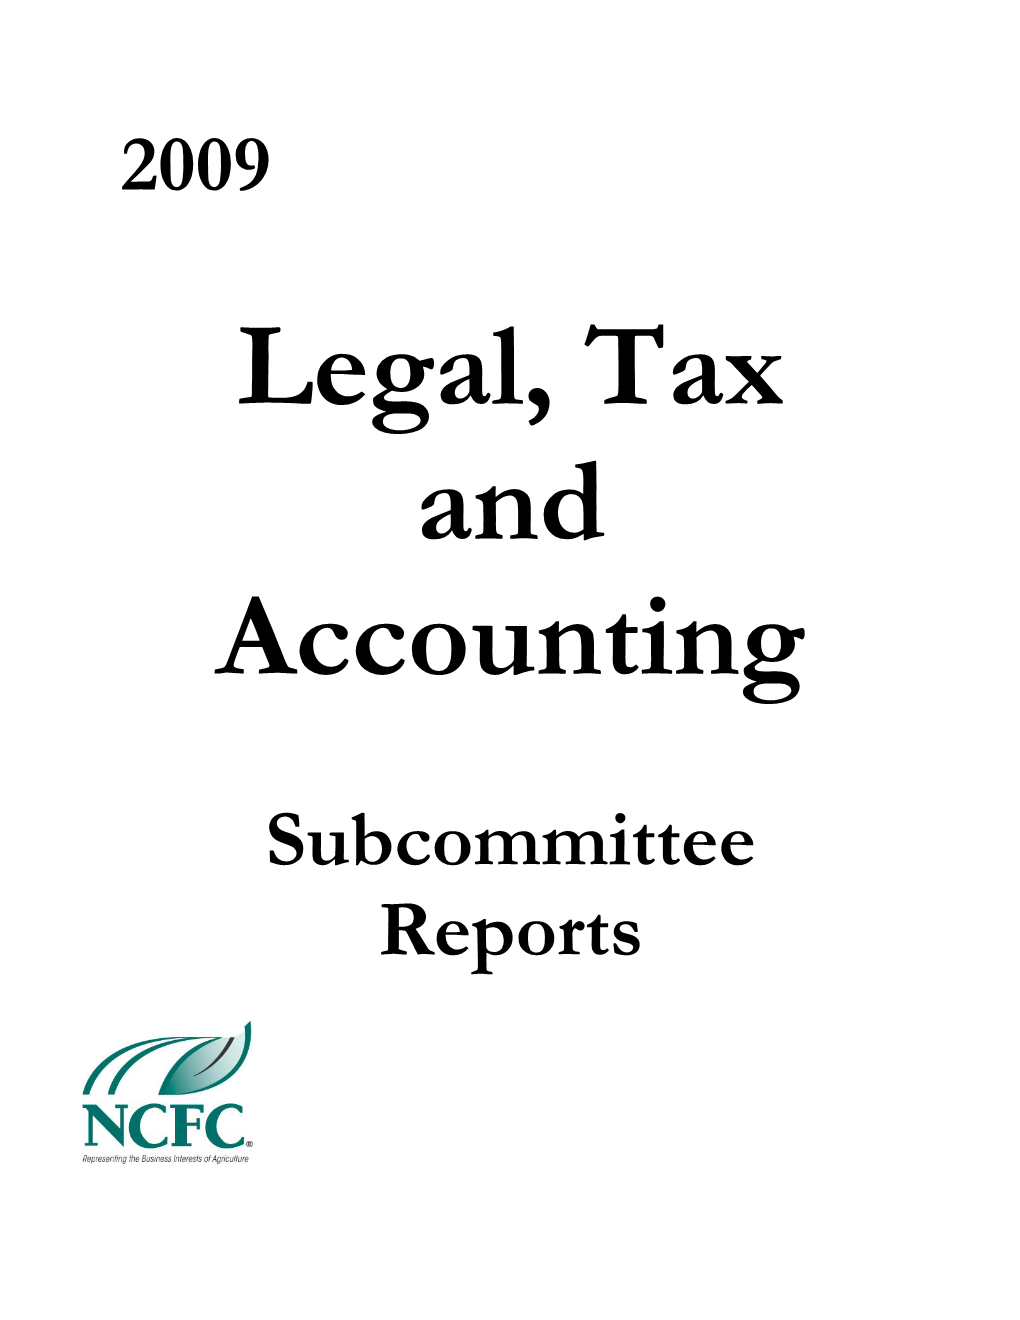 2009 Subcommittee Reports of the Legal, Tax and Accounting Committee Page